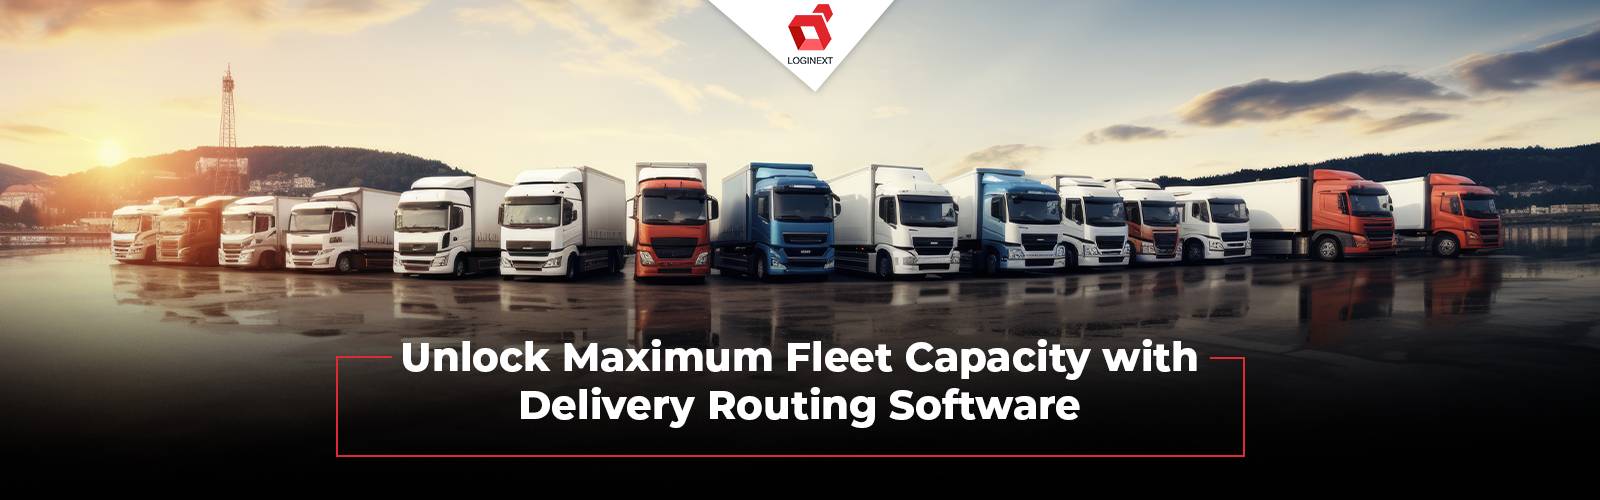 Fleet Optimization using Delivery Routing Software